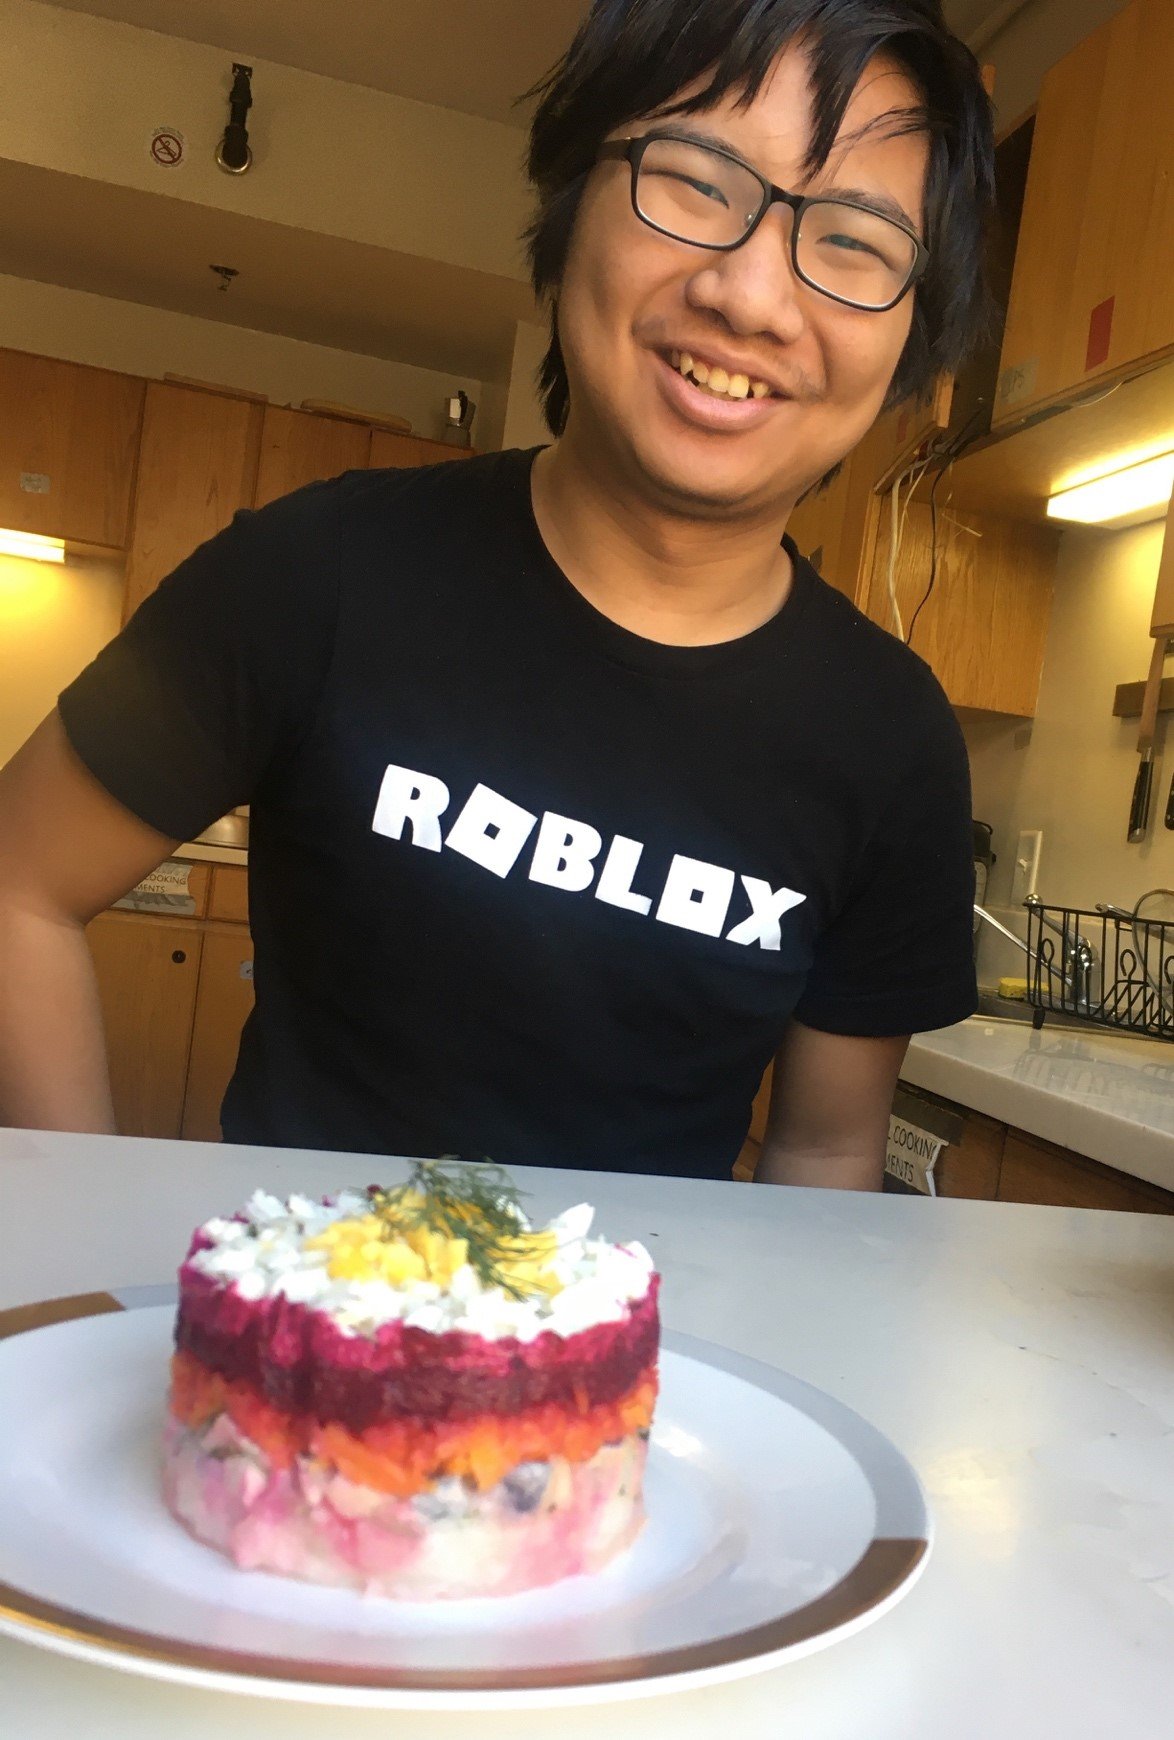 me, with a roblox shirt, in background. in foreground is a plate, with a dish on it, made of several layers of vegetables and fish.